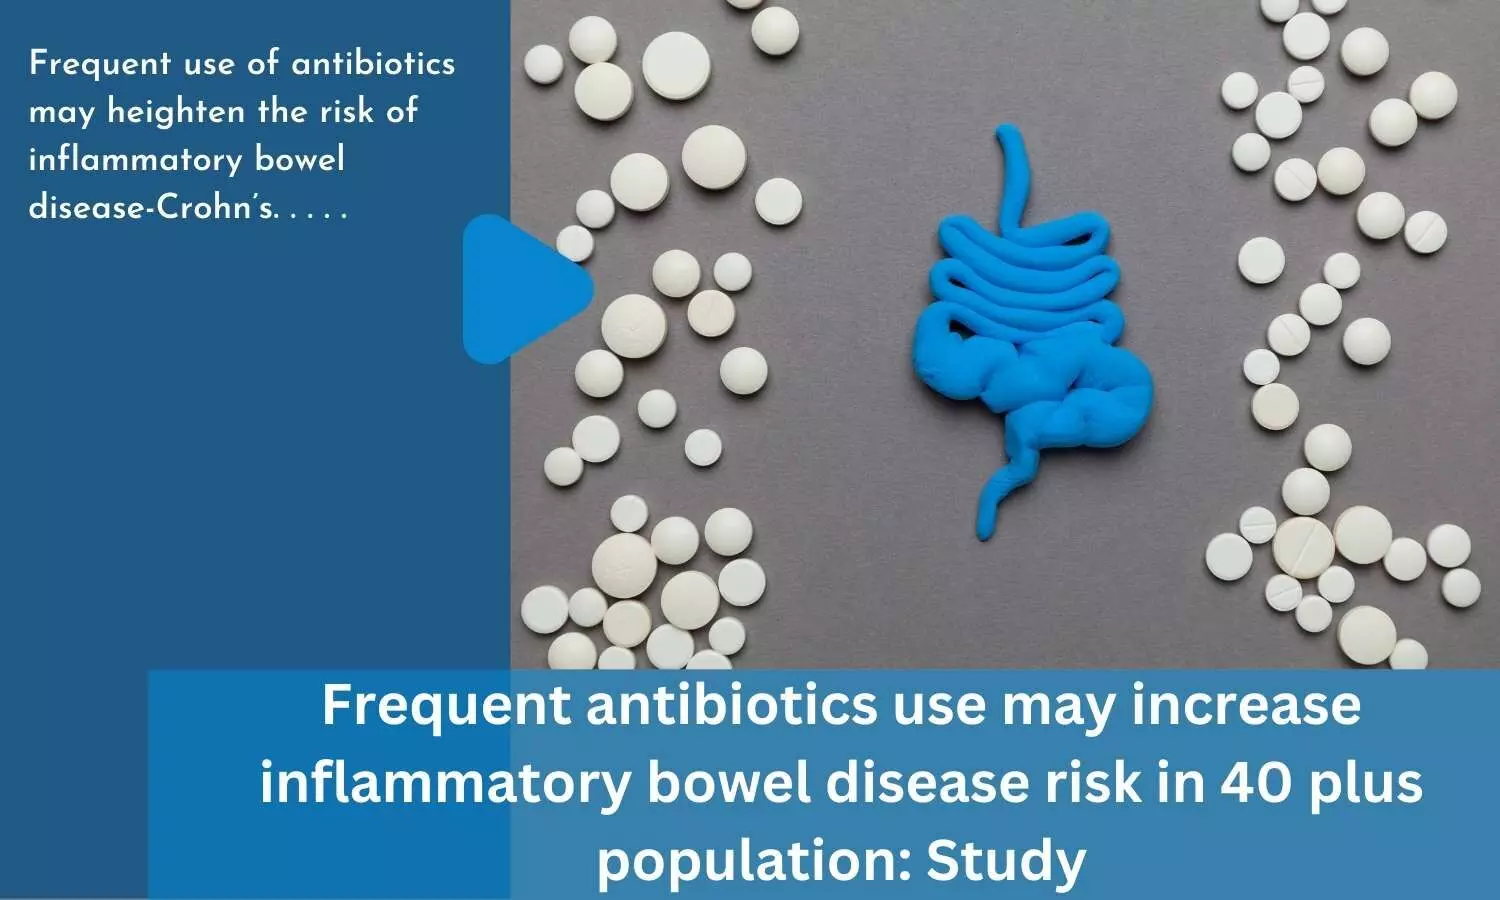 Frequent antibiotics use may increase inflammatory bowel disease risk in 40 plus population: Study